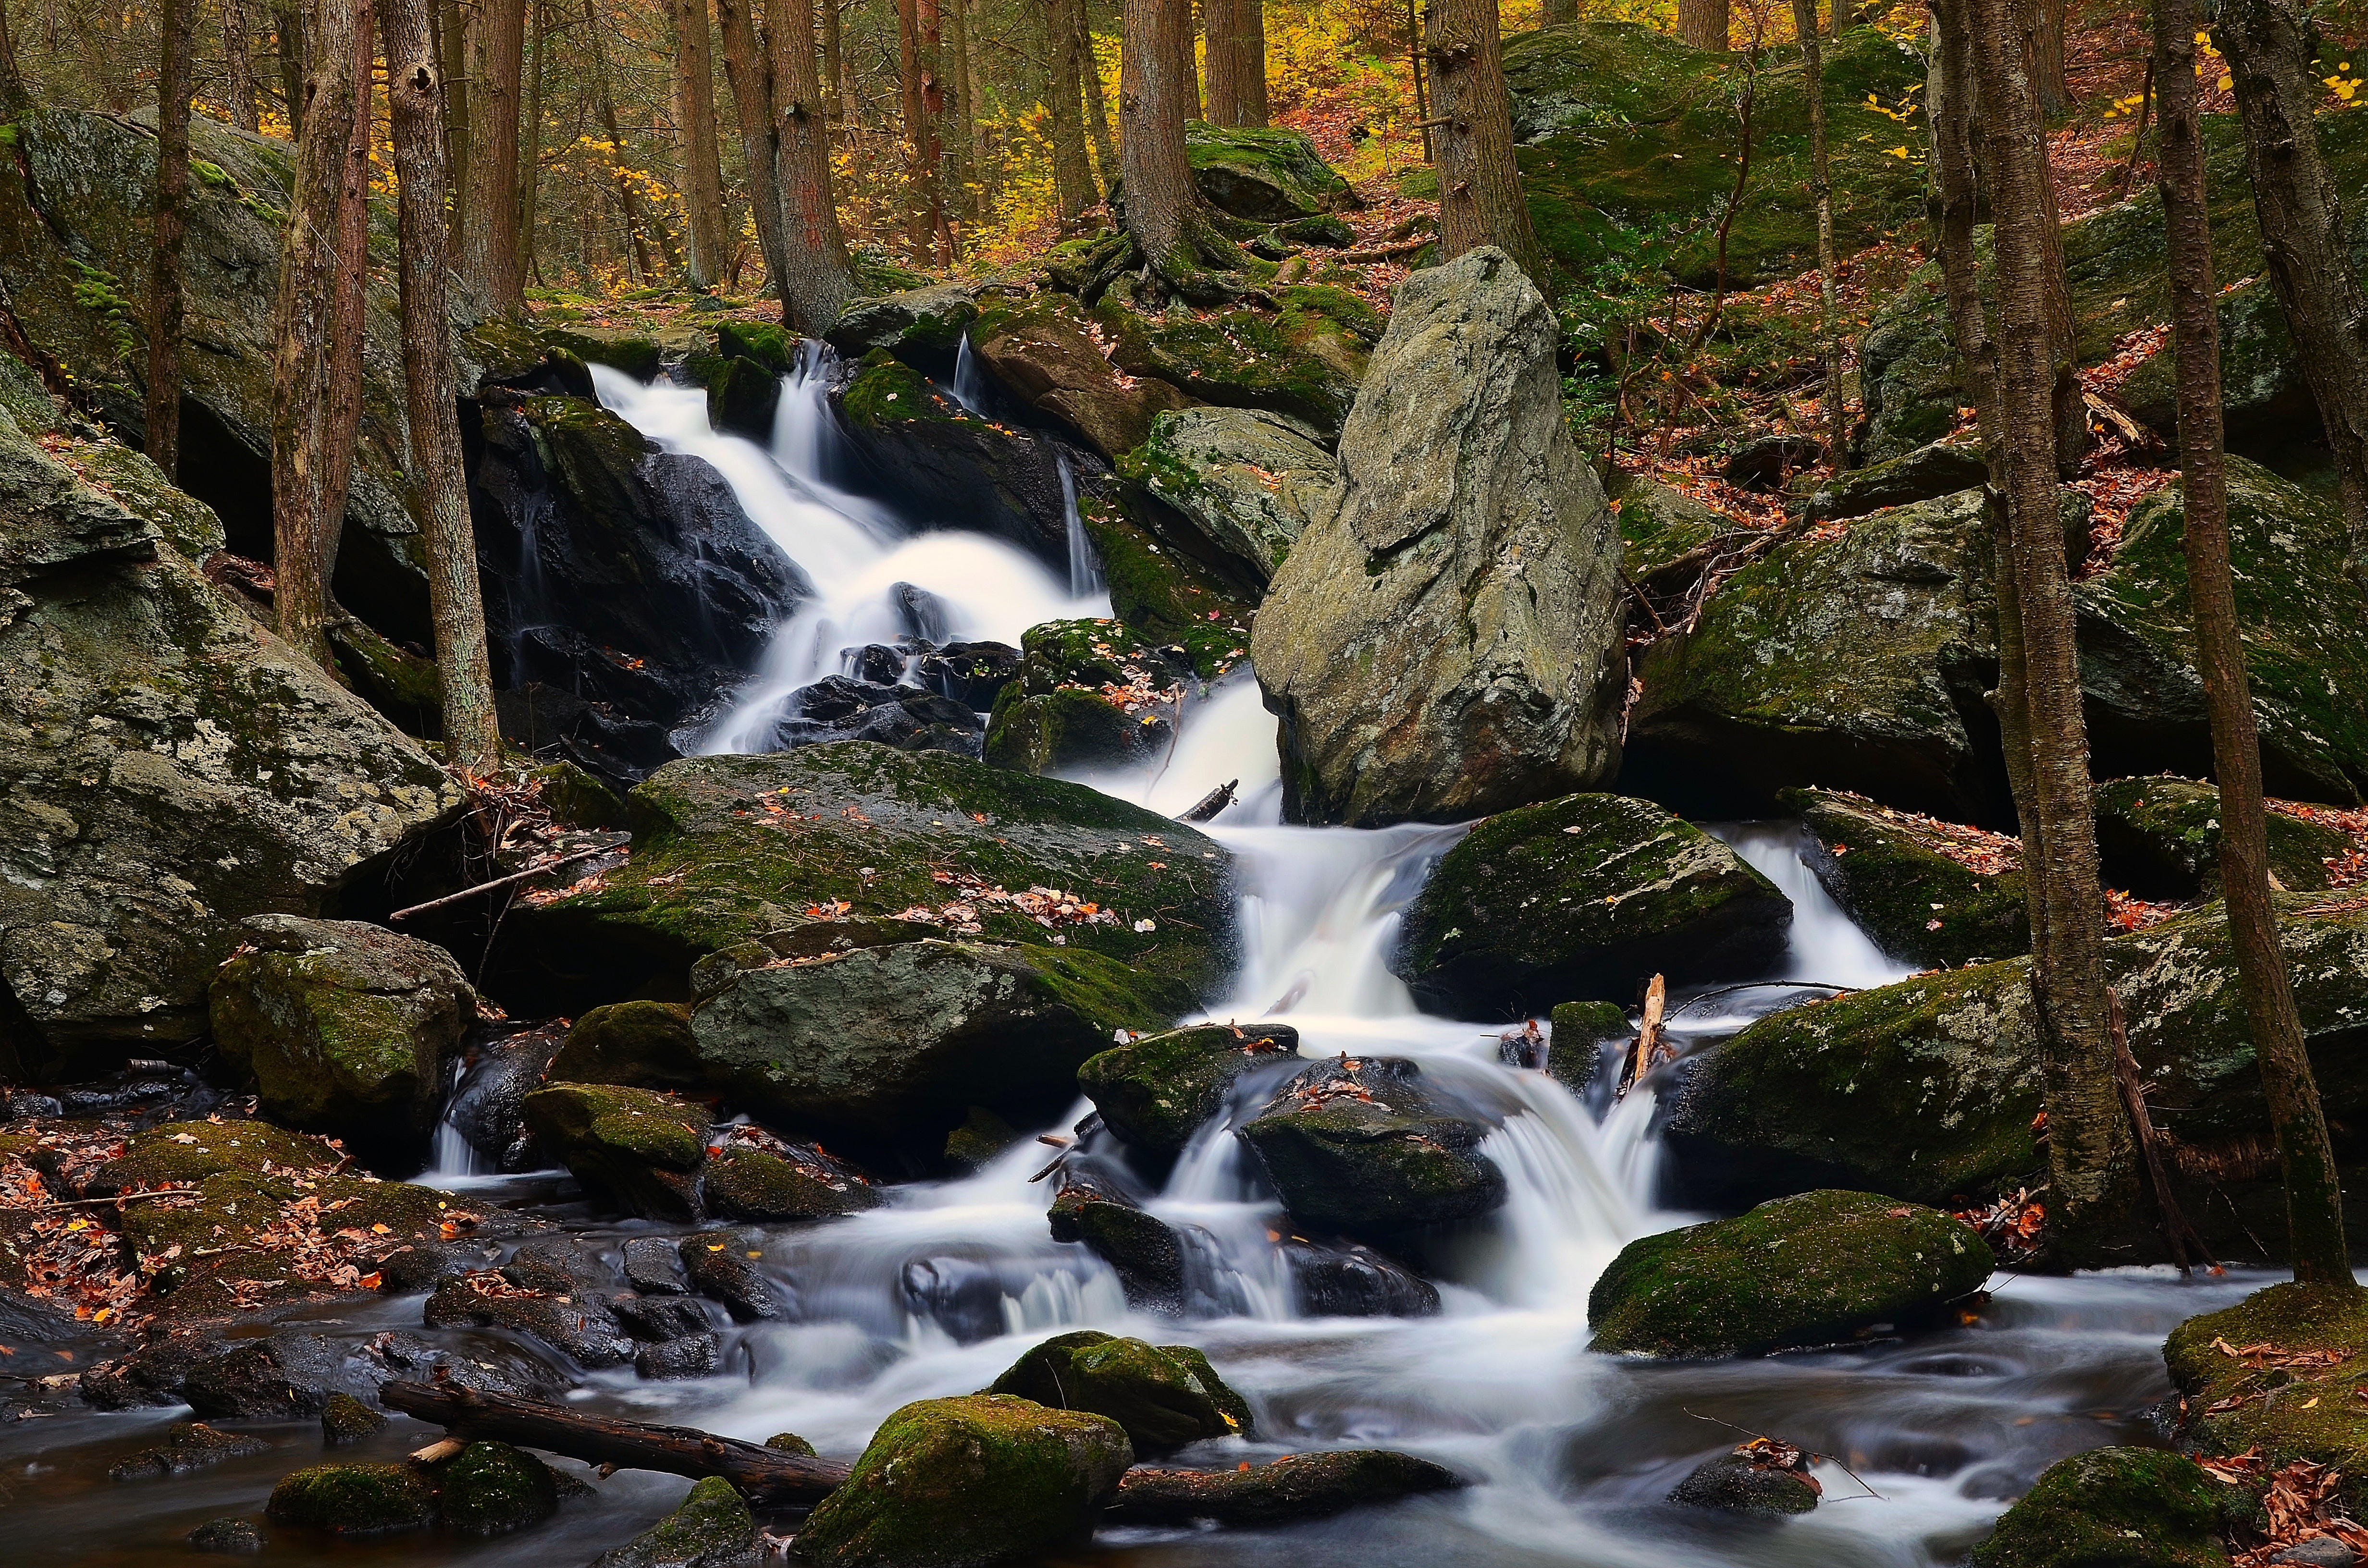 General 4928x3264 plants trees forest water long exposure creeks outdoors rocks stones